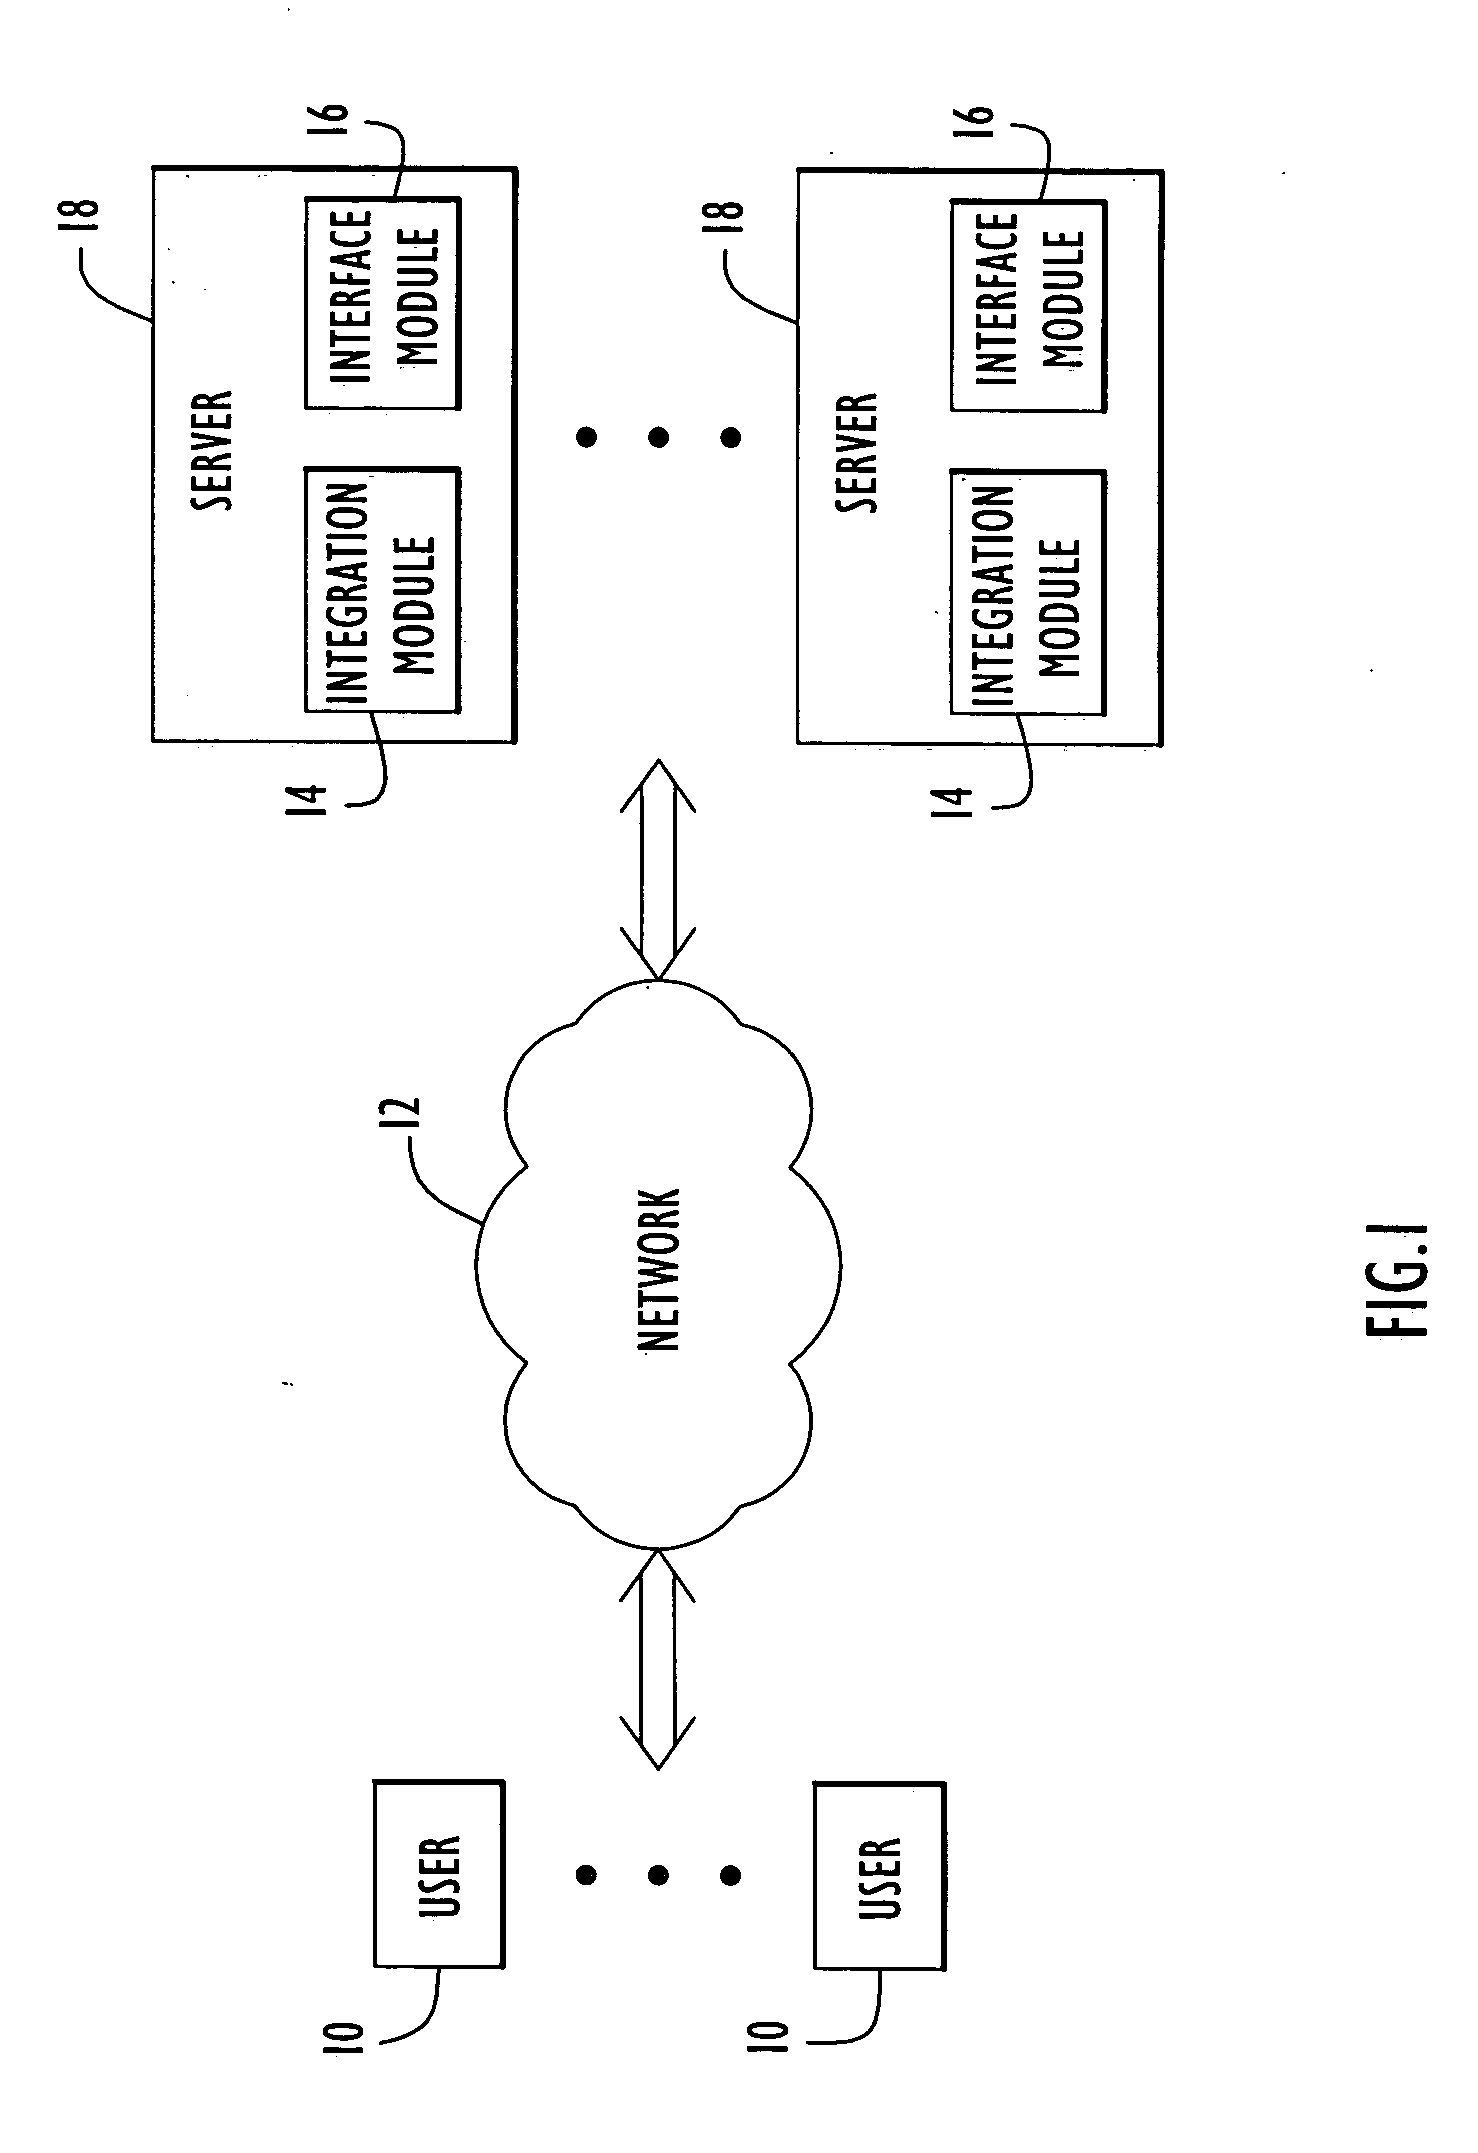 Method and apparatus for integrating user communities with documentation